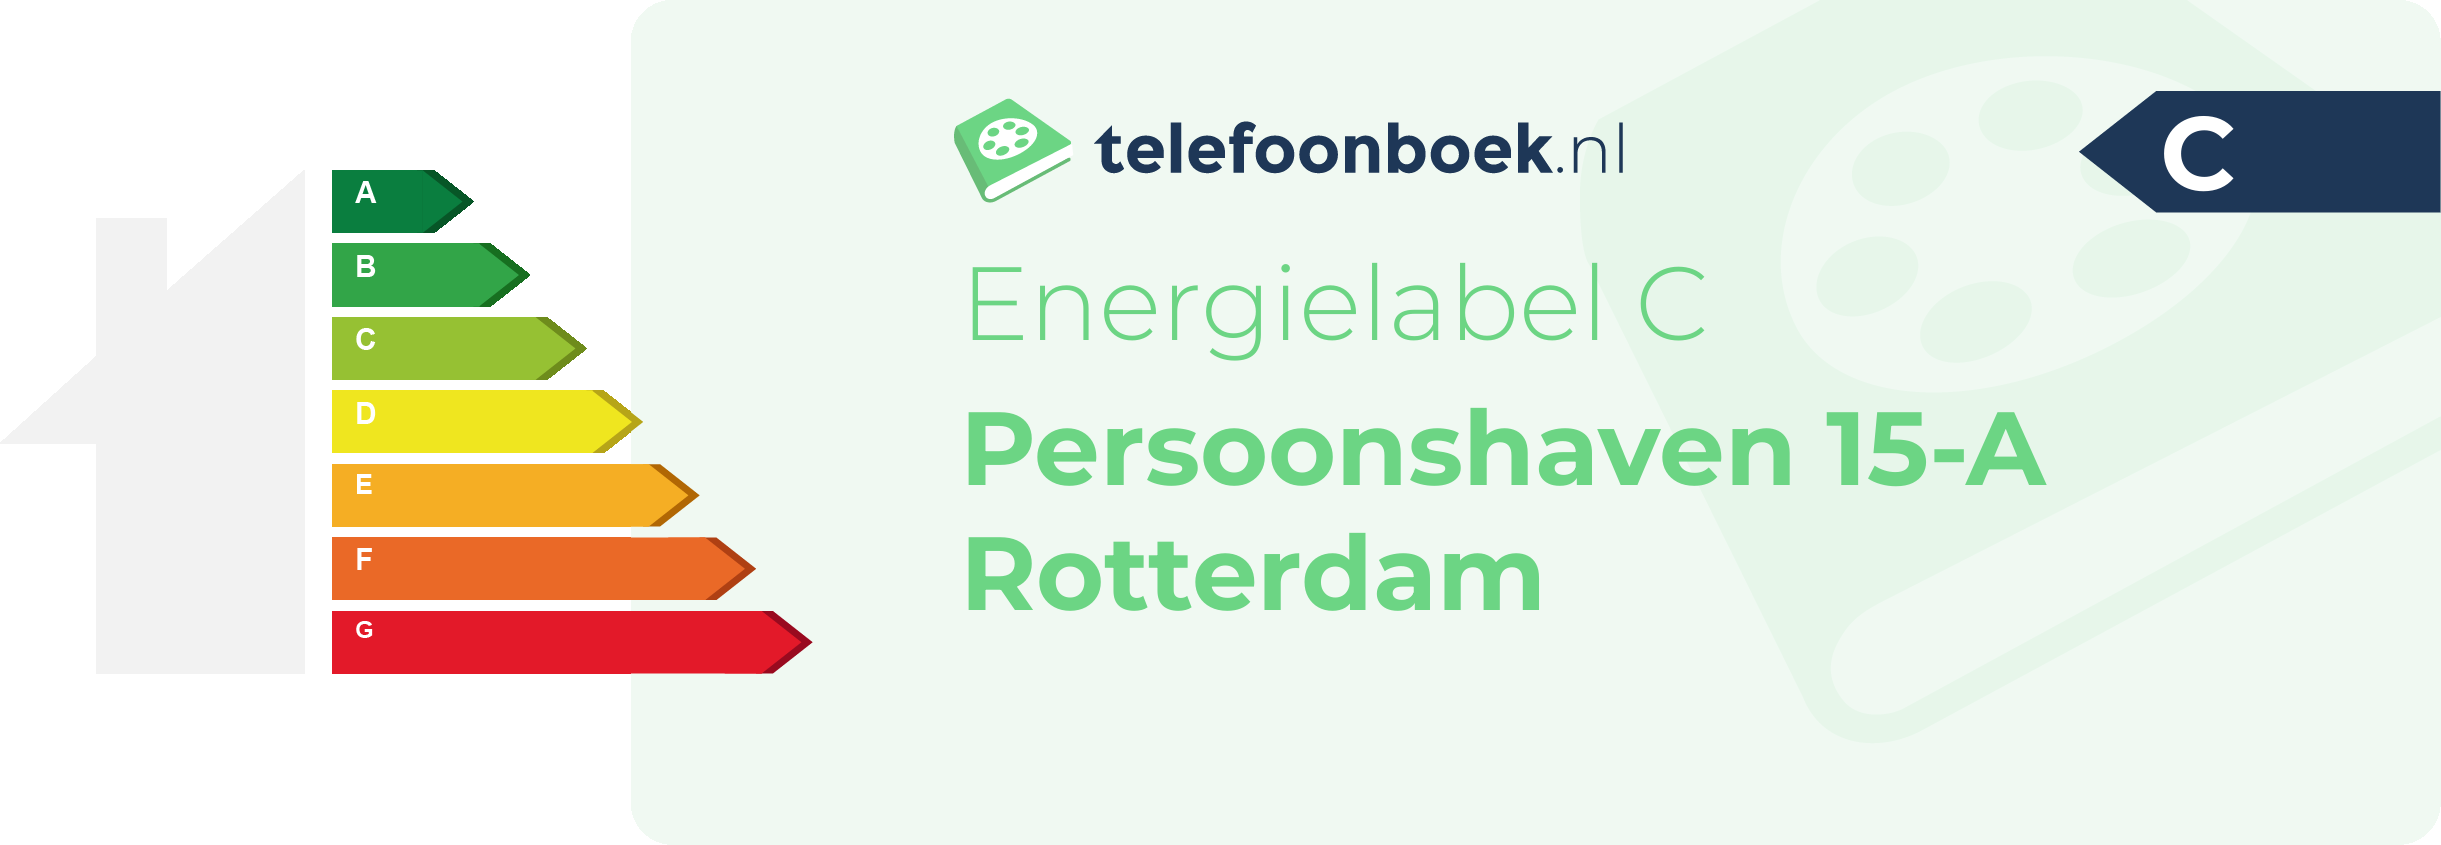 Energielabel Persoonshaven 15-A Rotterdam